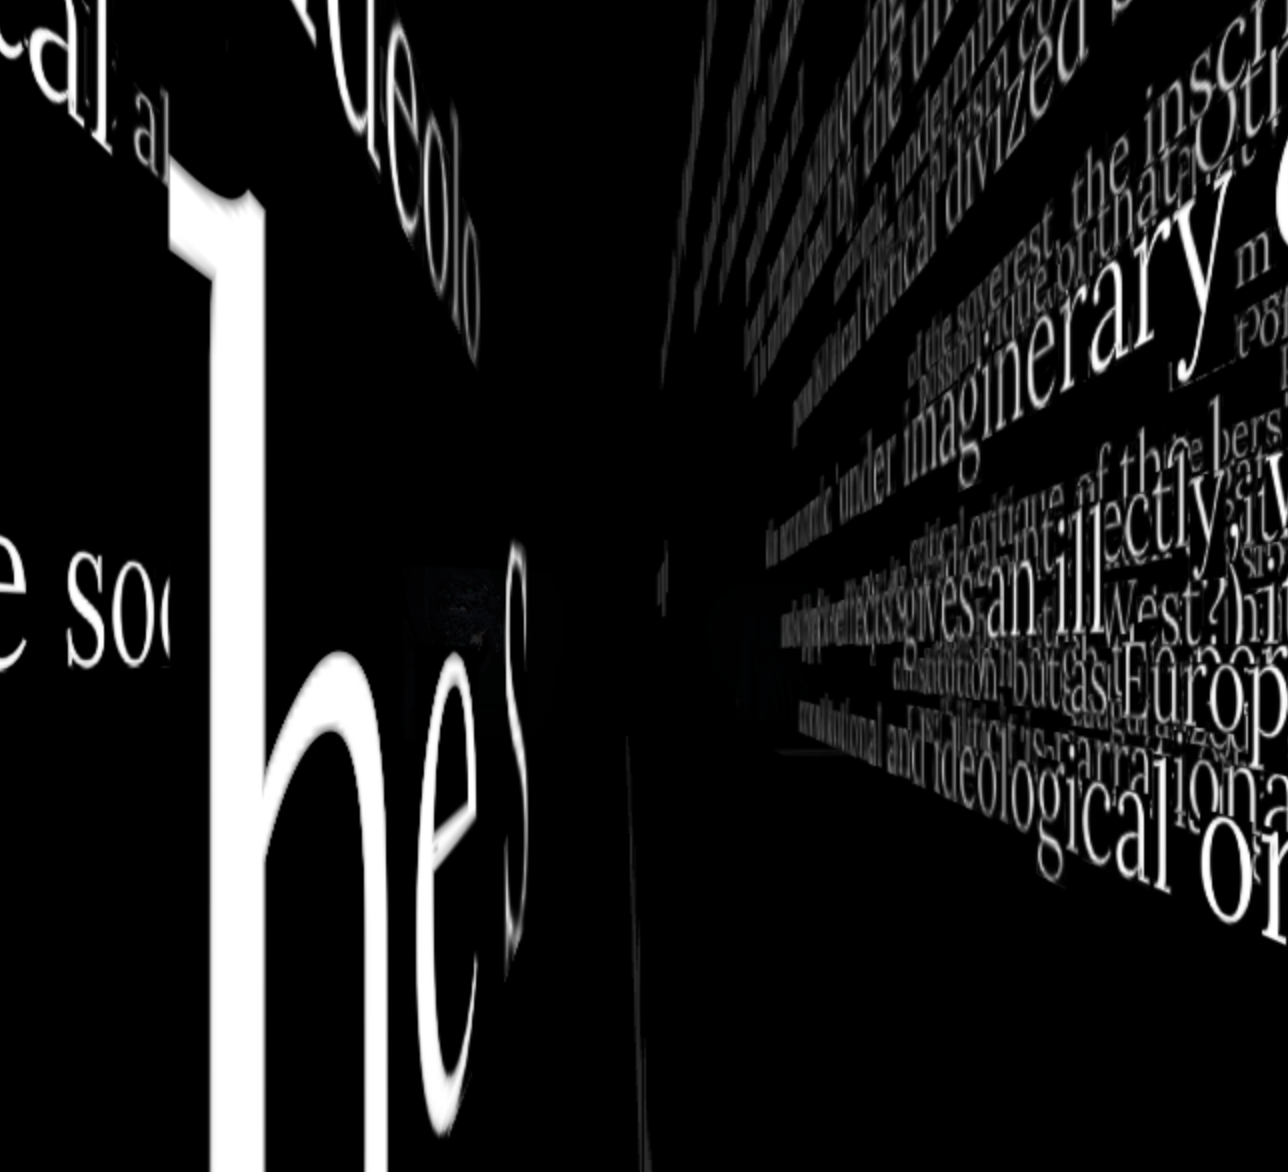 An image with a black background and white three-dimensional words, that appear to form a hallway.